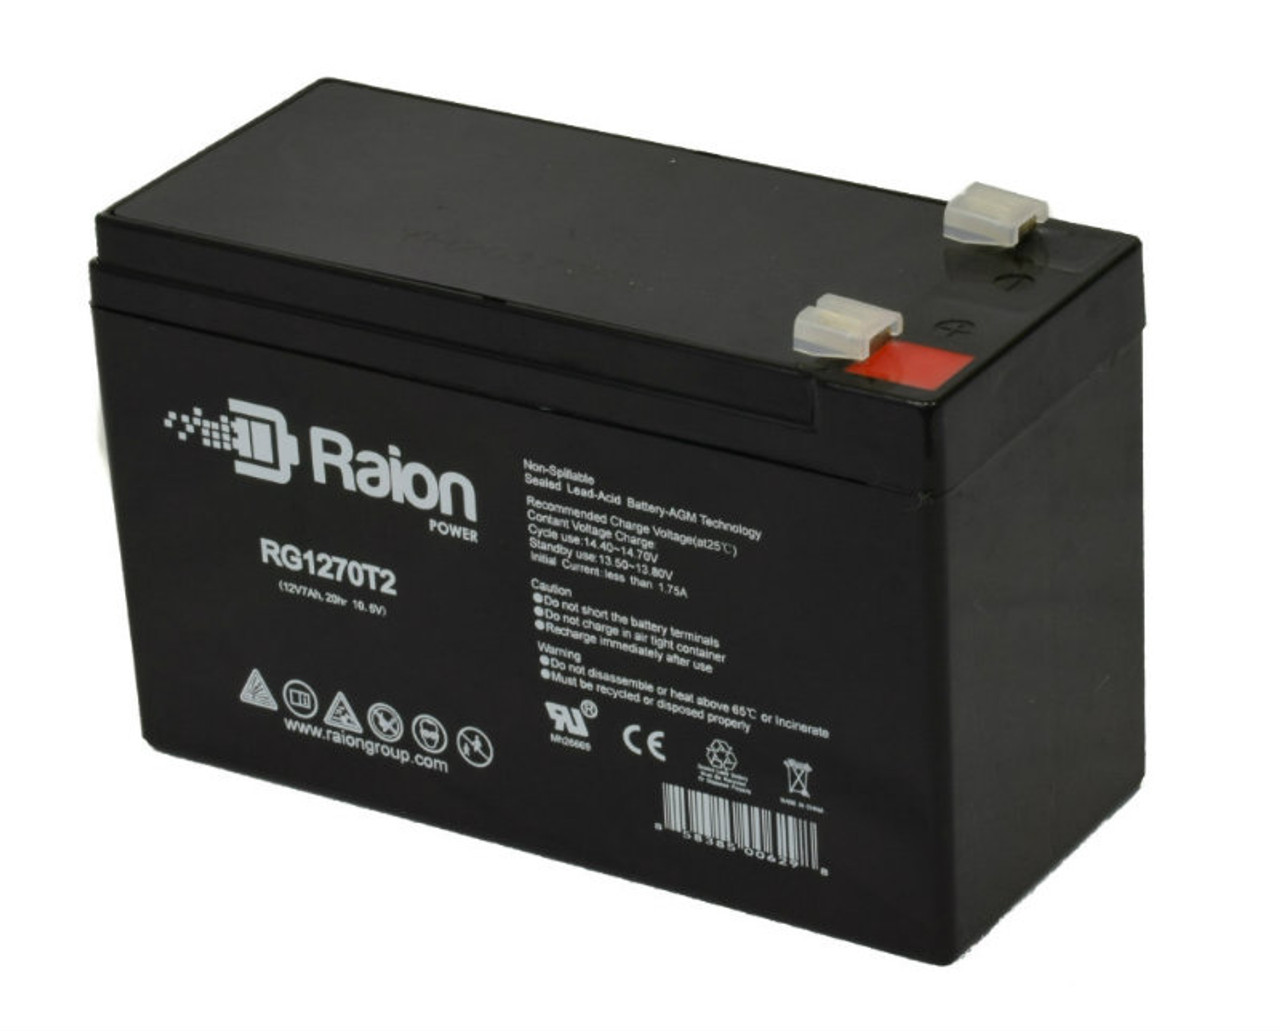 Raion Power RG1270T1 12V 7Ah Non-Spillable Replacement Battery for Ferno-ille 3000 Shower Trolley